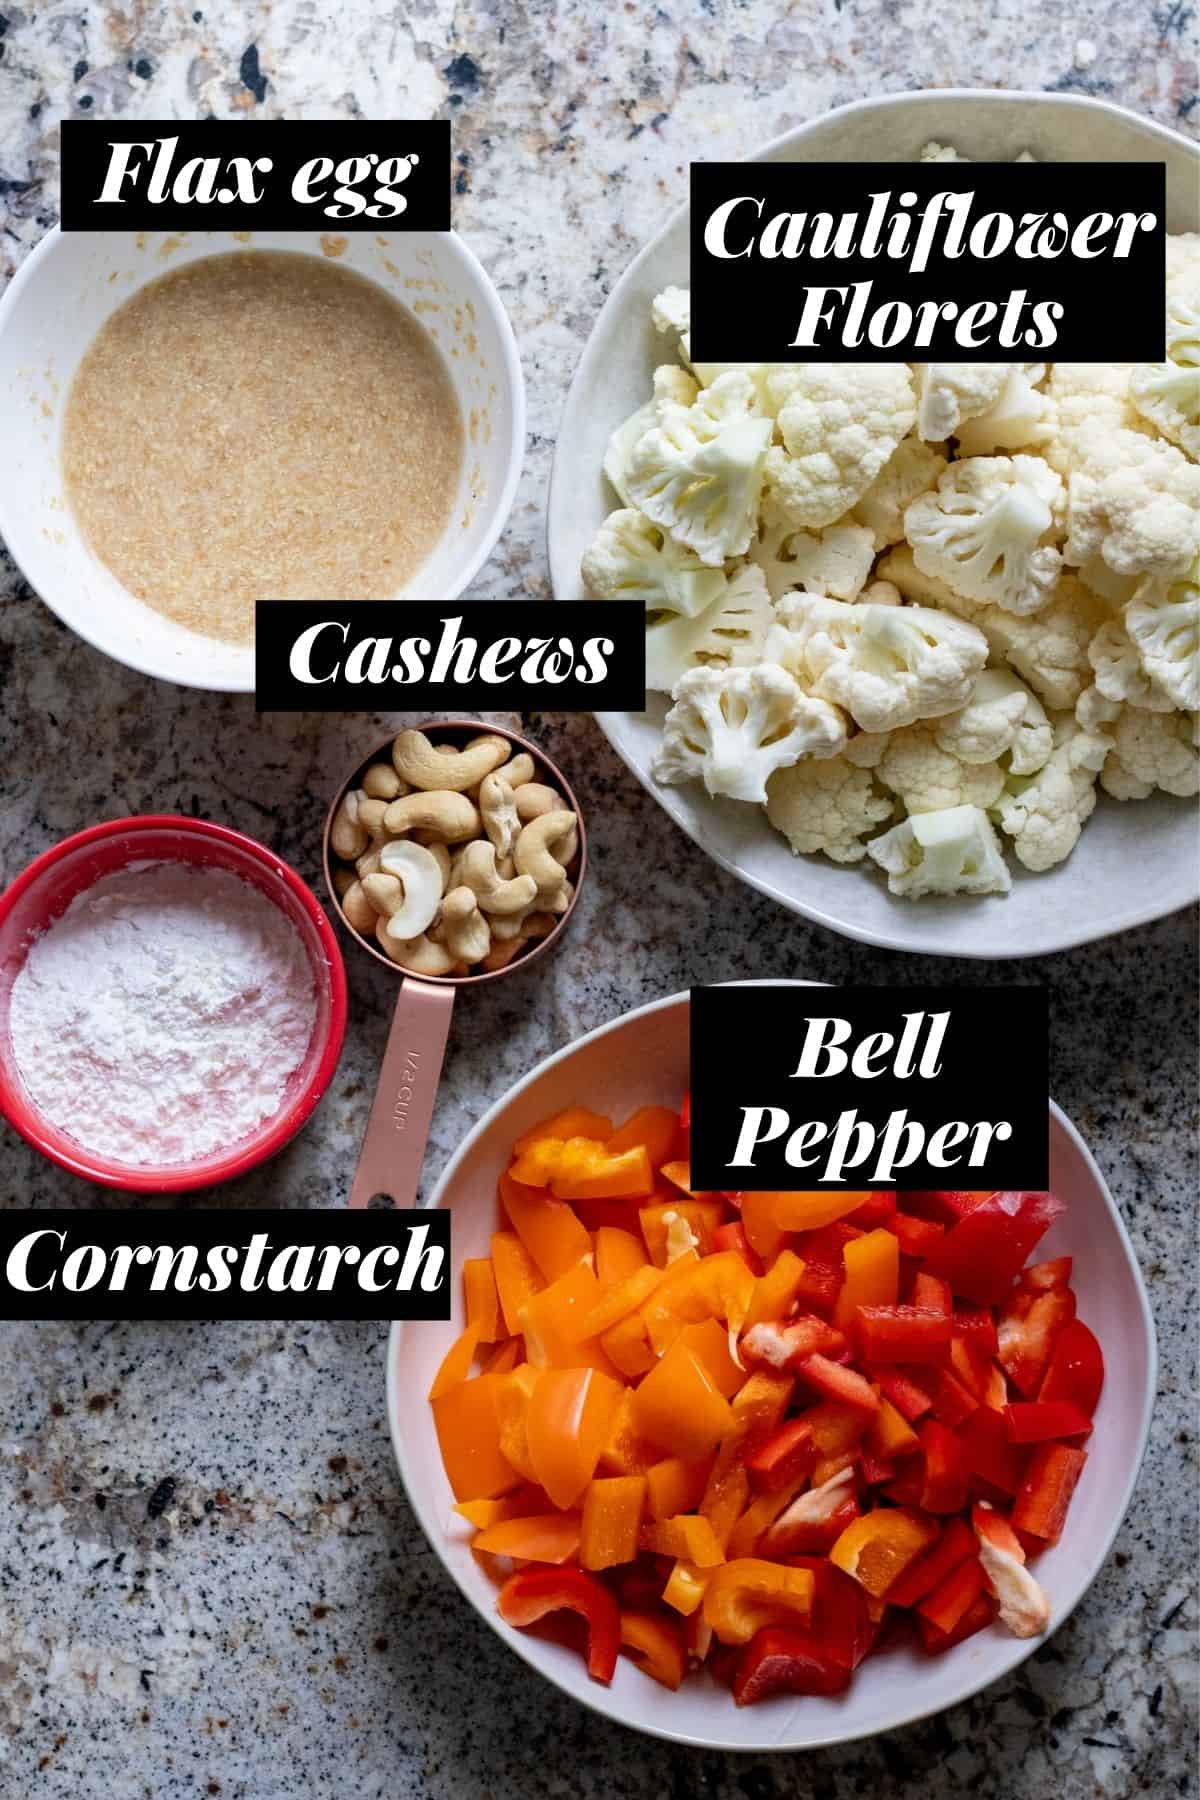 Base ingredients of recipe measured out into individual bowls.